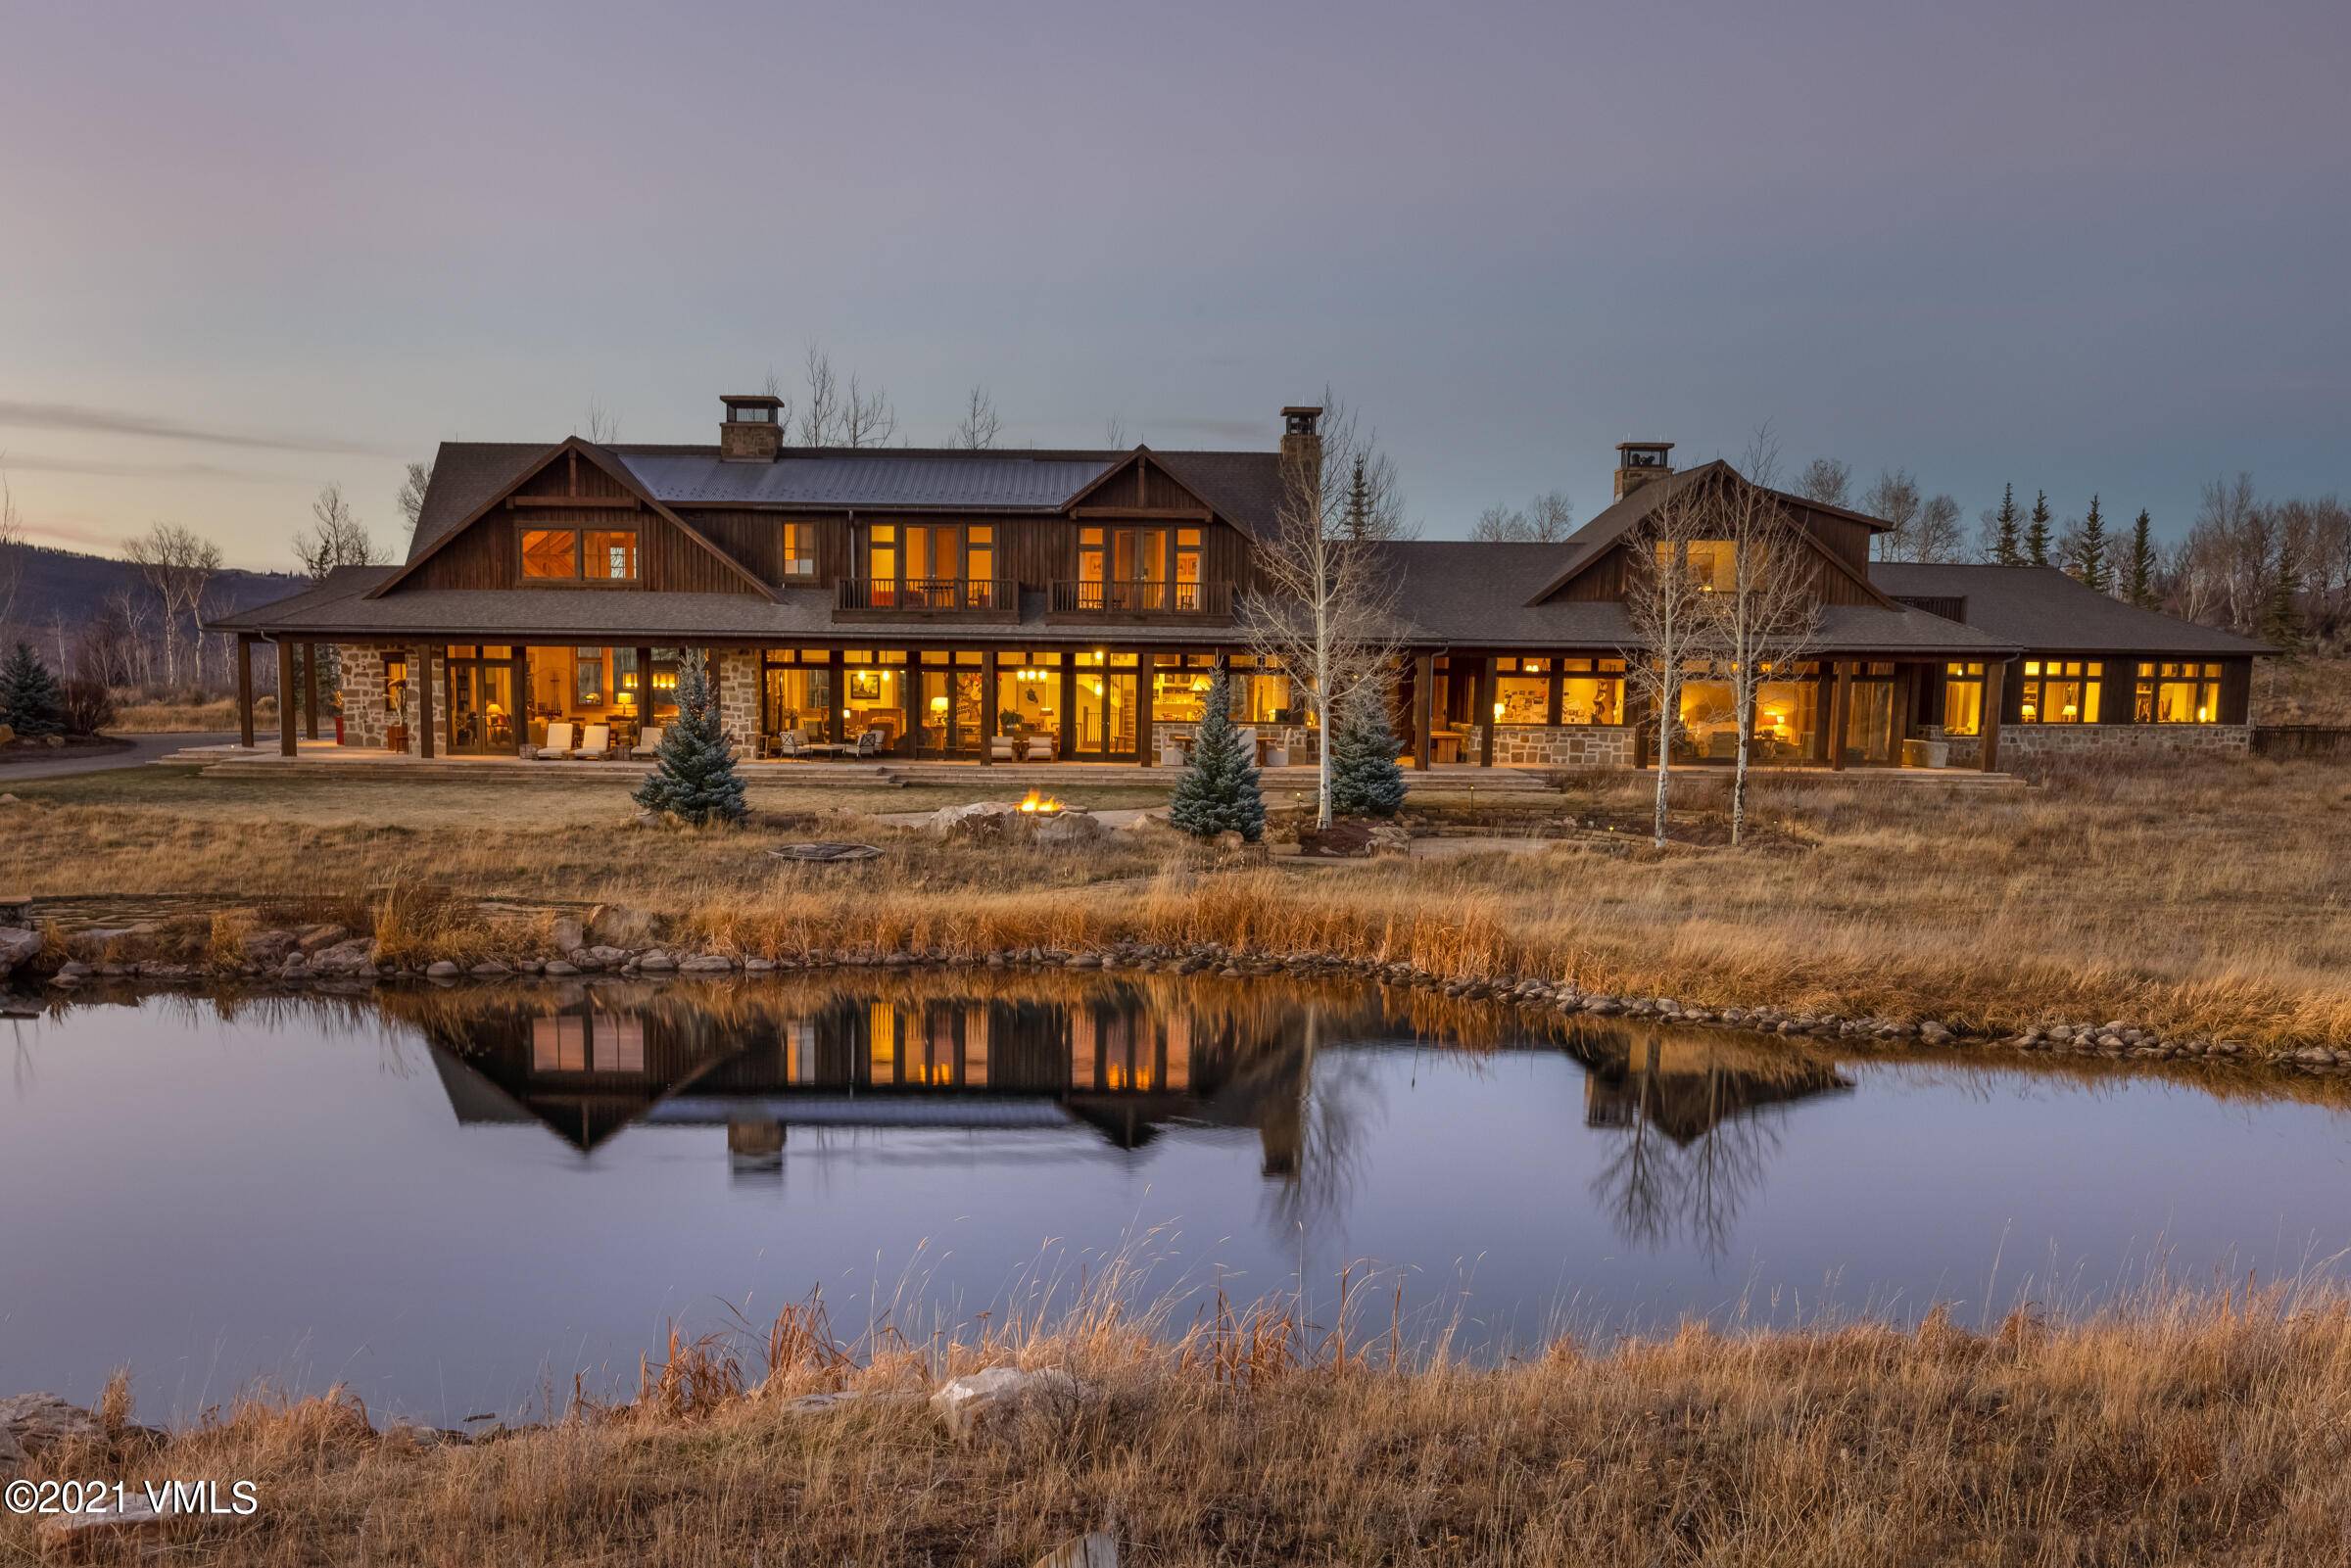 This unbelievable mountain retreat with 145 useable acres is only 20 minutes from Beaver Creek skiing or 12 minutes from shopping in Edwards.